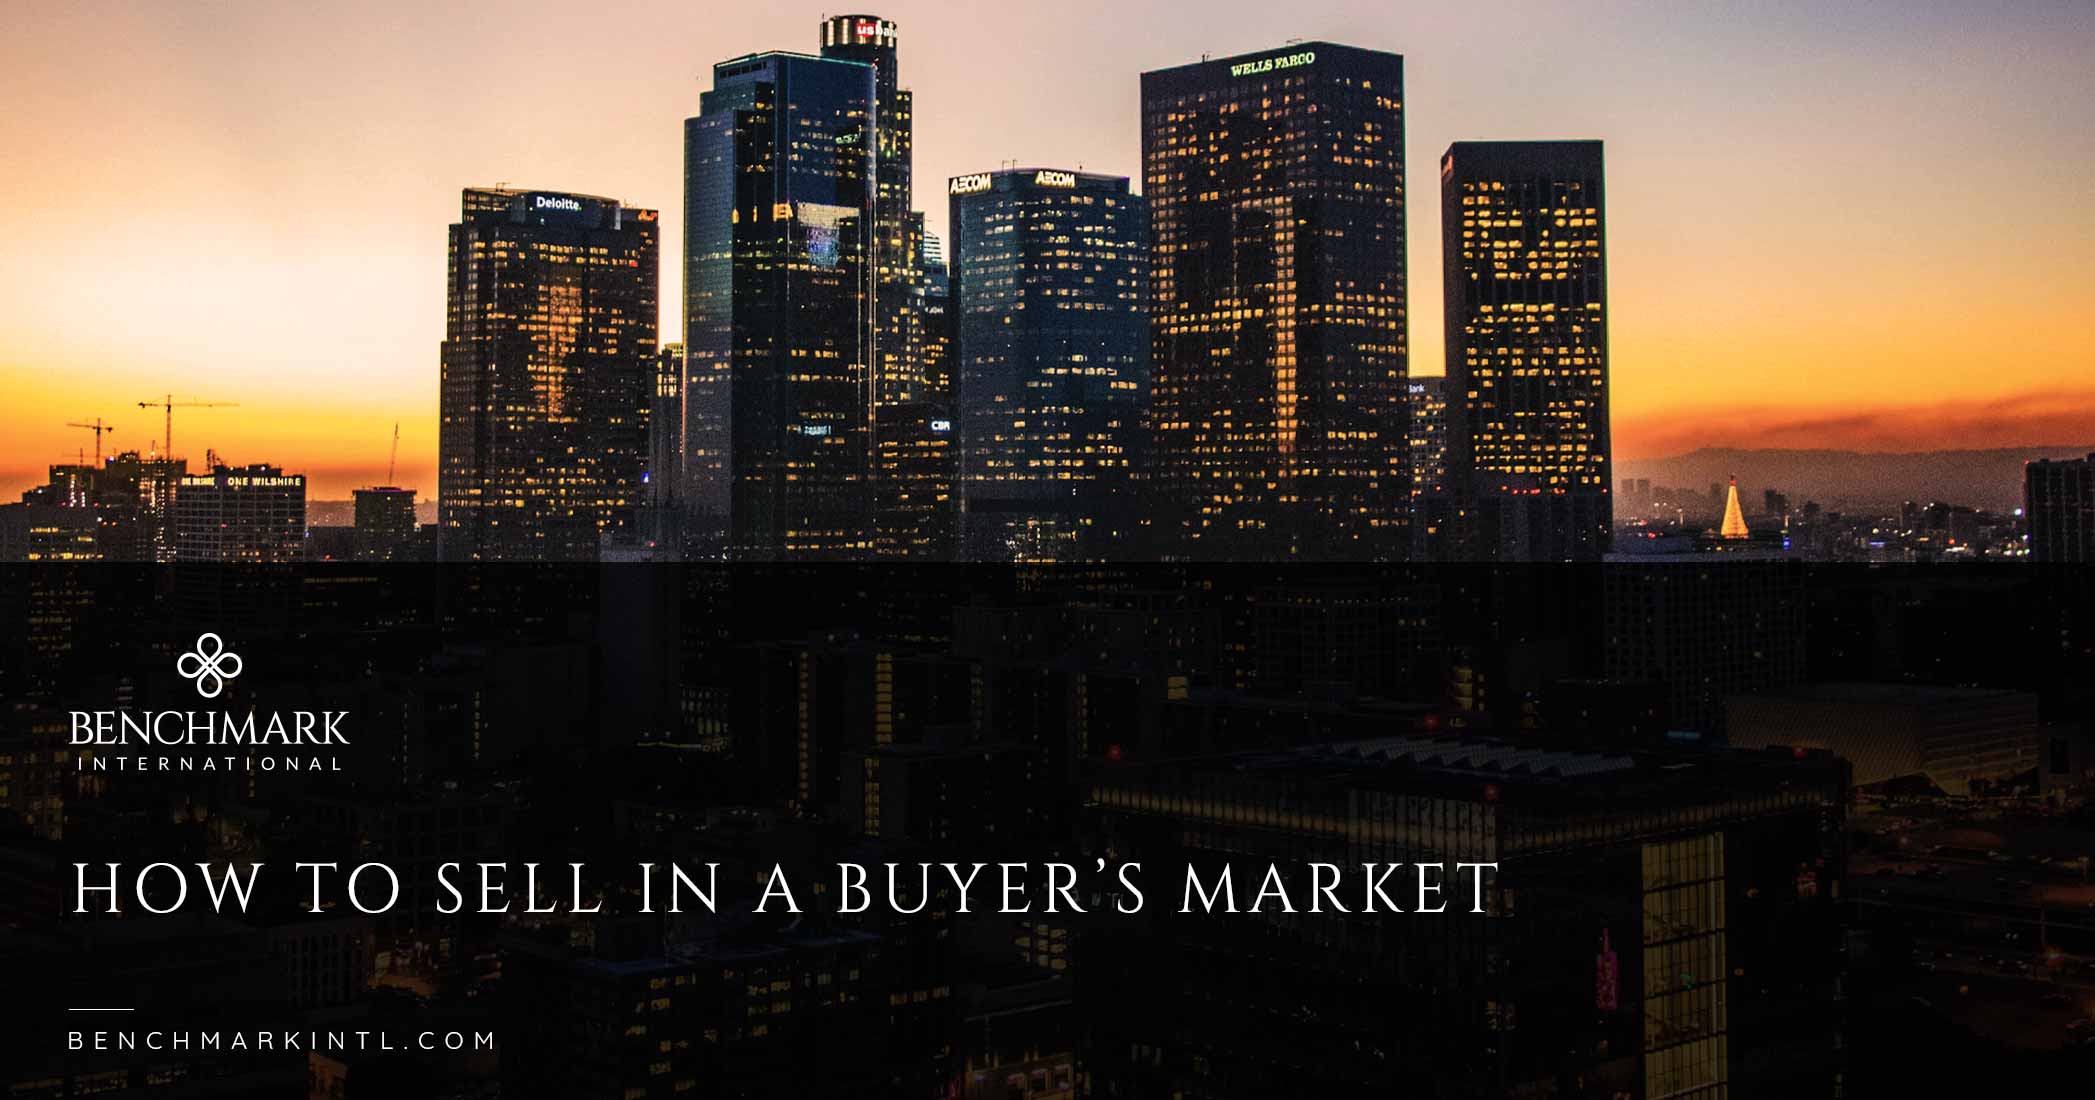 How To Sell In A Buyer’s Market